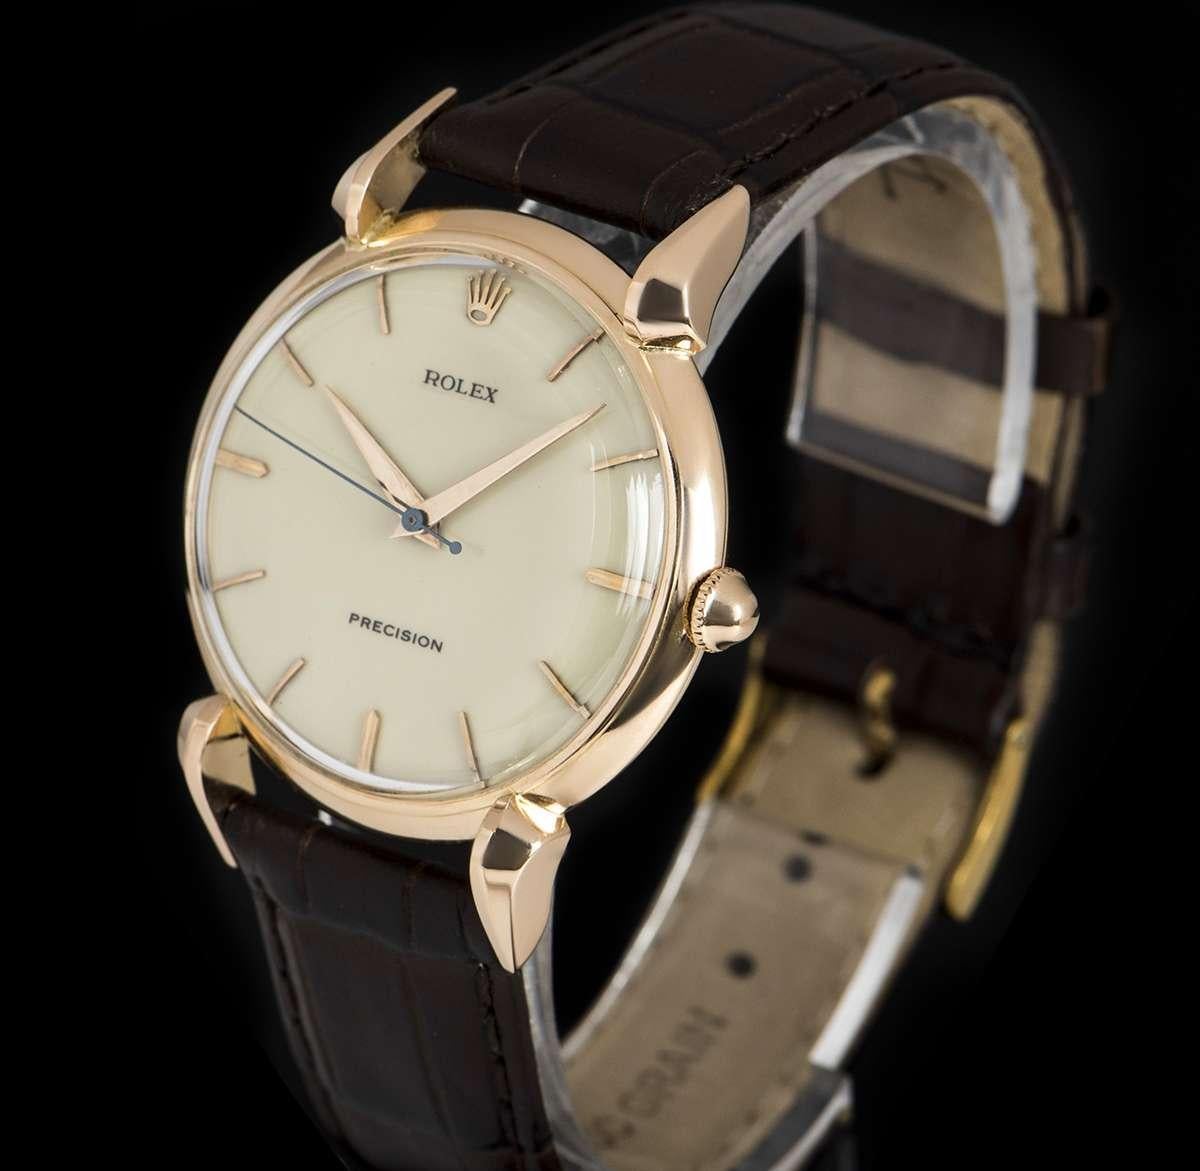 An 18k Rose Gold Precision Vintage Gents Wristwatch, cream enamel dial with applied hour markers, a fixed 18k rose gold smooth bezel, 18k rose gold tear drop lugs, a brown leather strap (not by Rolex) with an original gold plated pin buckle, plastic